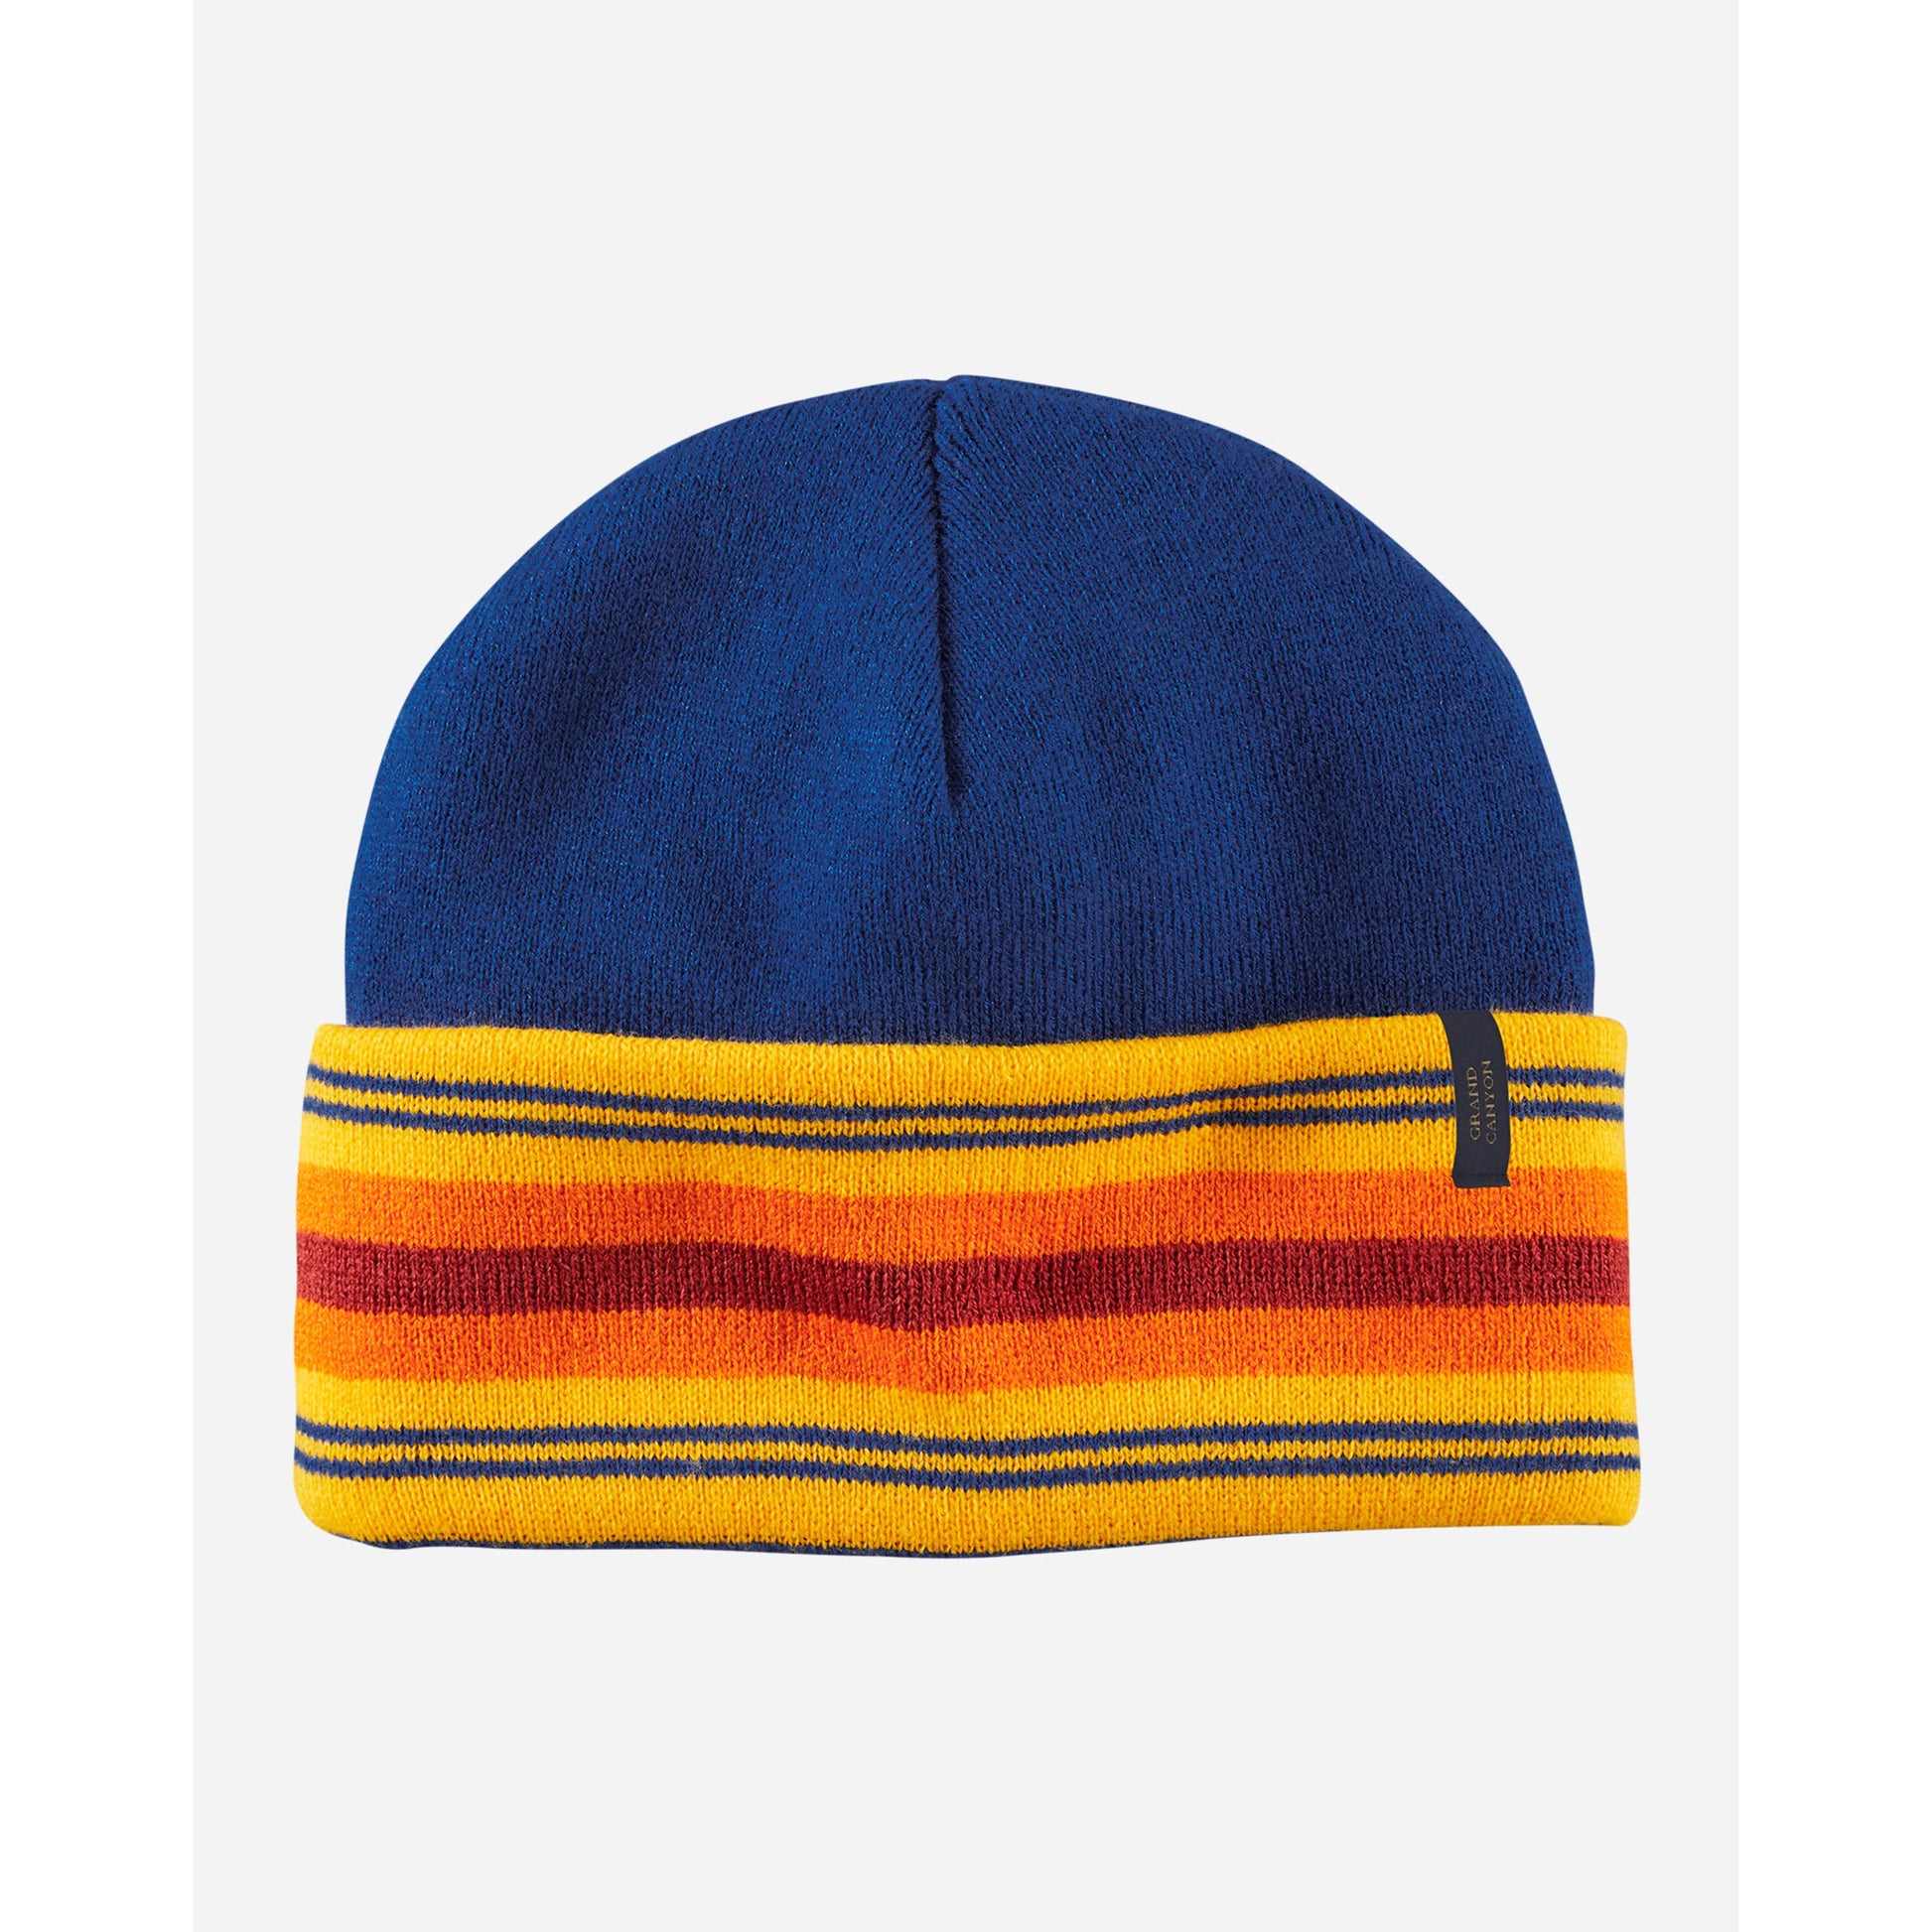 Beanie Hat, soft stretchy ribbed knit, blue with orange/yellow/blue/red stripes